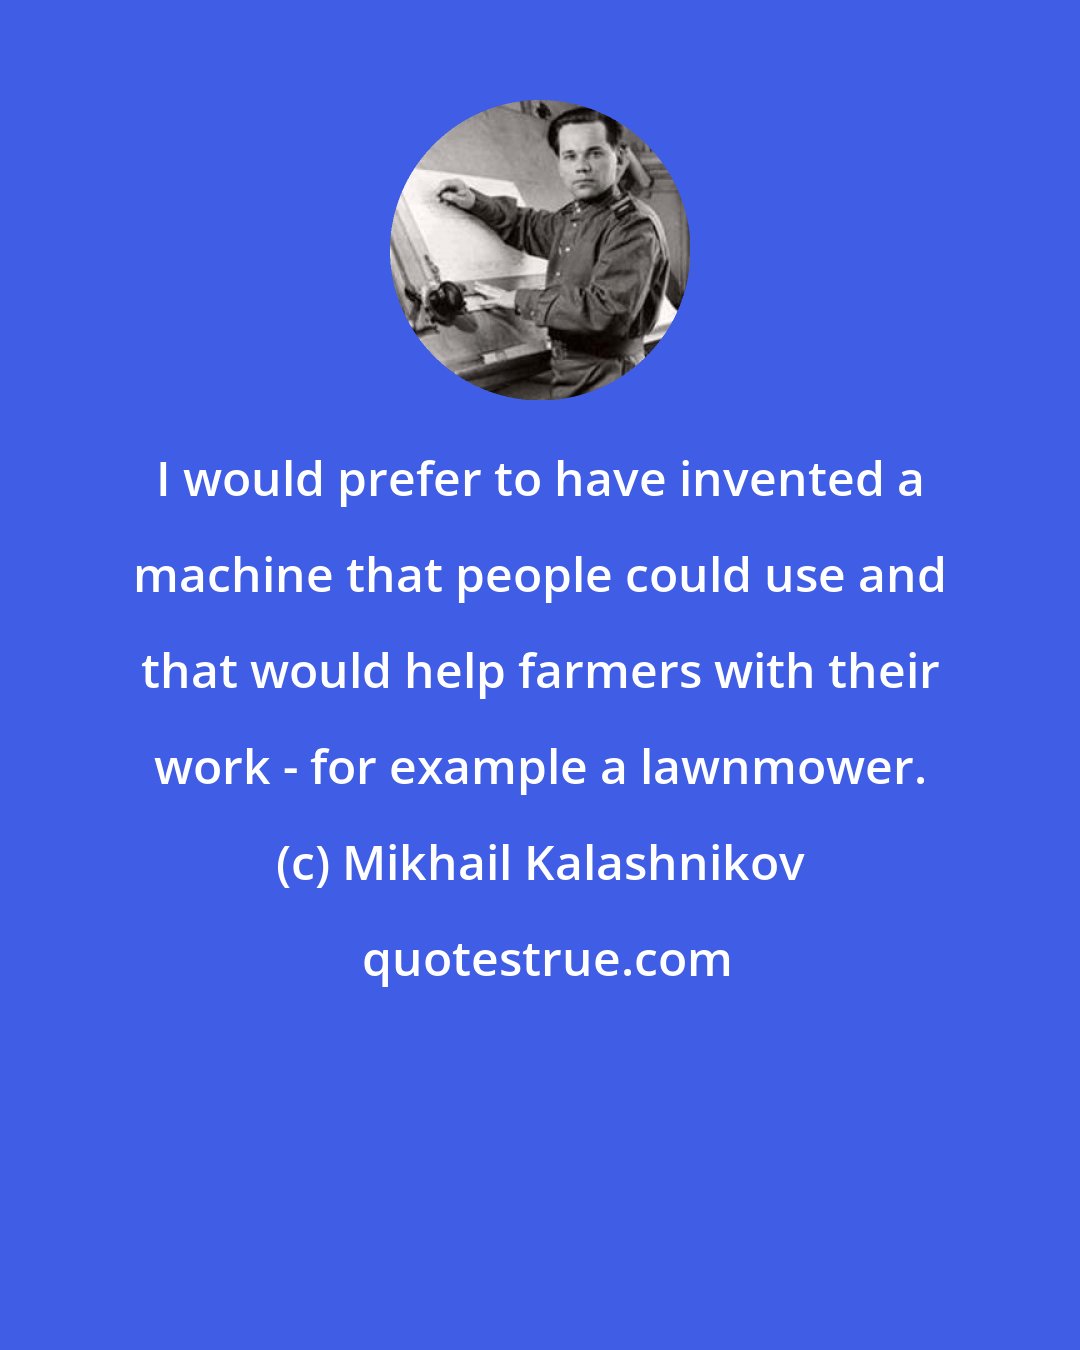 Mikhail Kalashnikov: I would prefer to have invented a machine that people could use and that would help farmers with their work - for example a lawnmower.